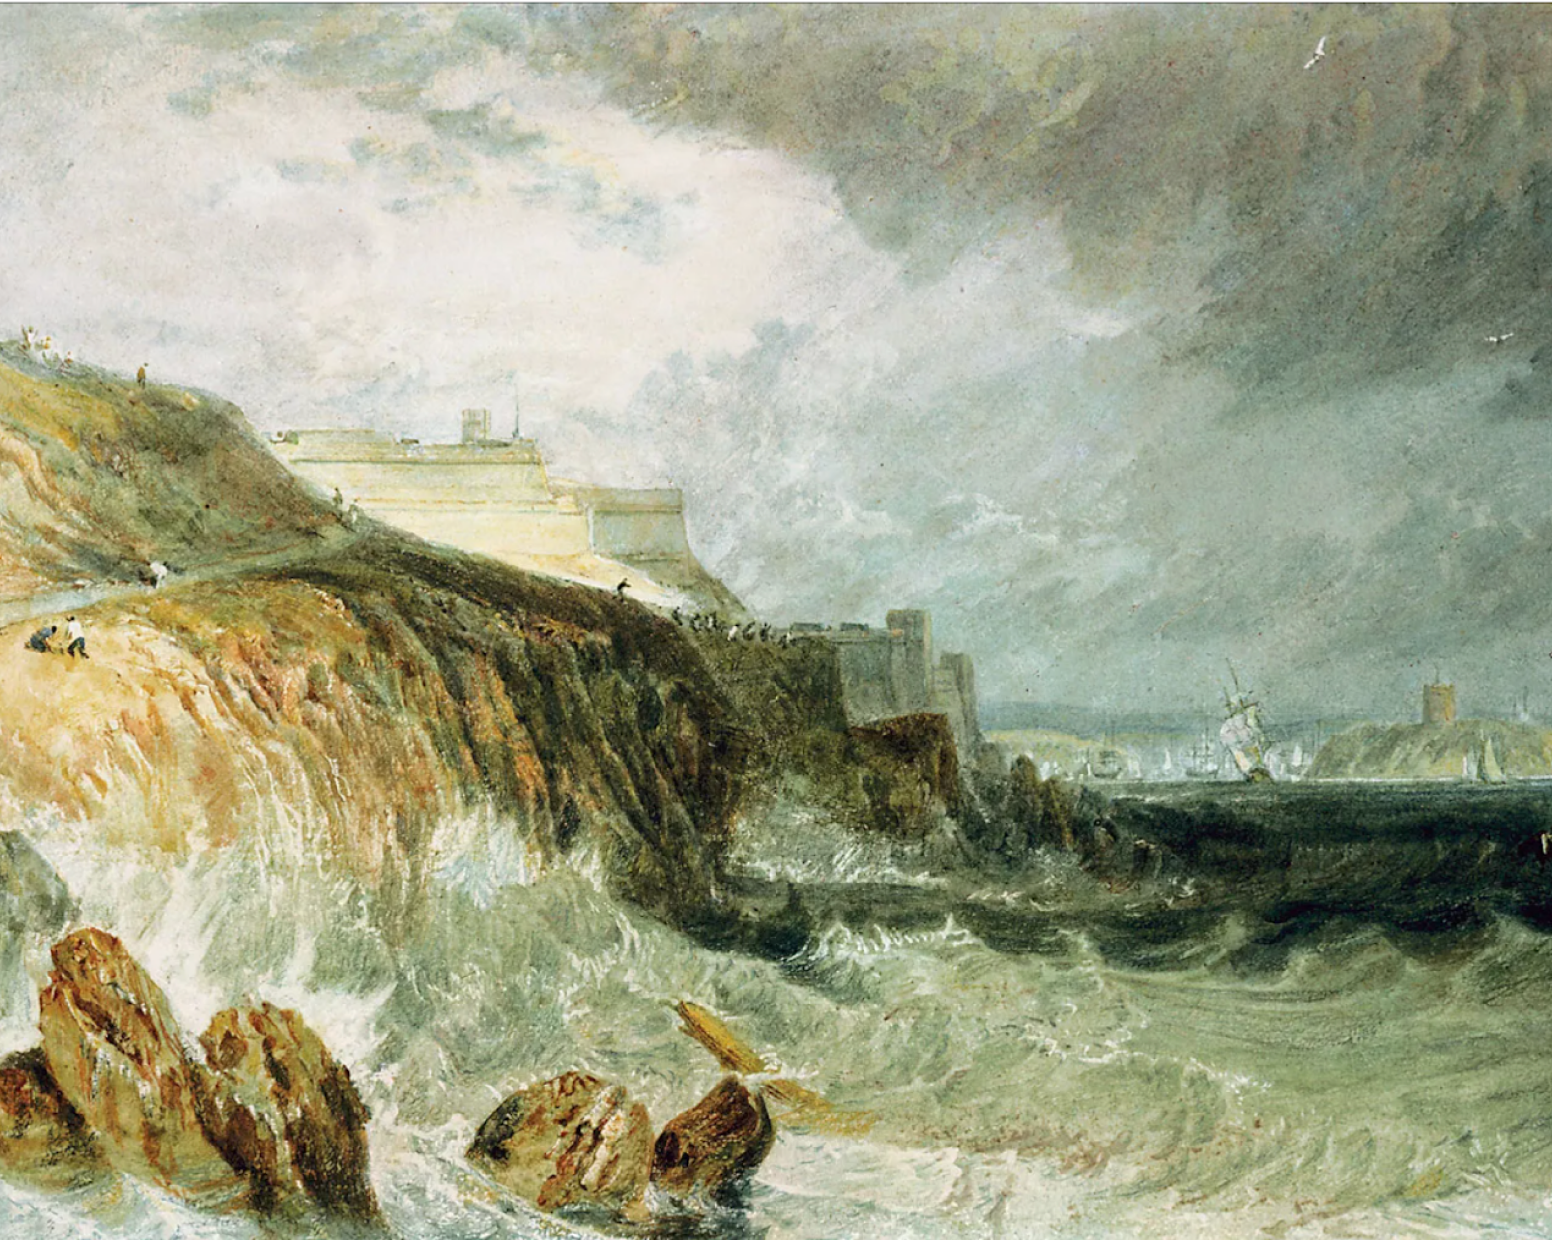 Plymouth Citadel, pencil and watercolor on paper by J.M.W. Turner, c. 1813